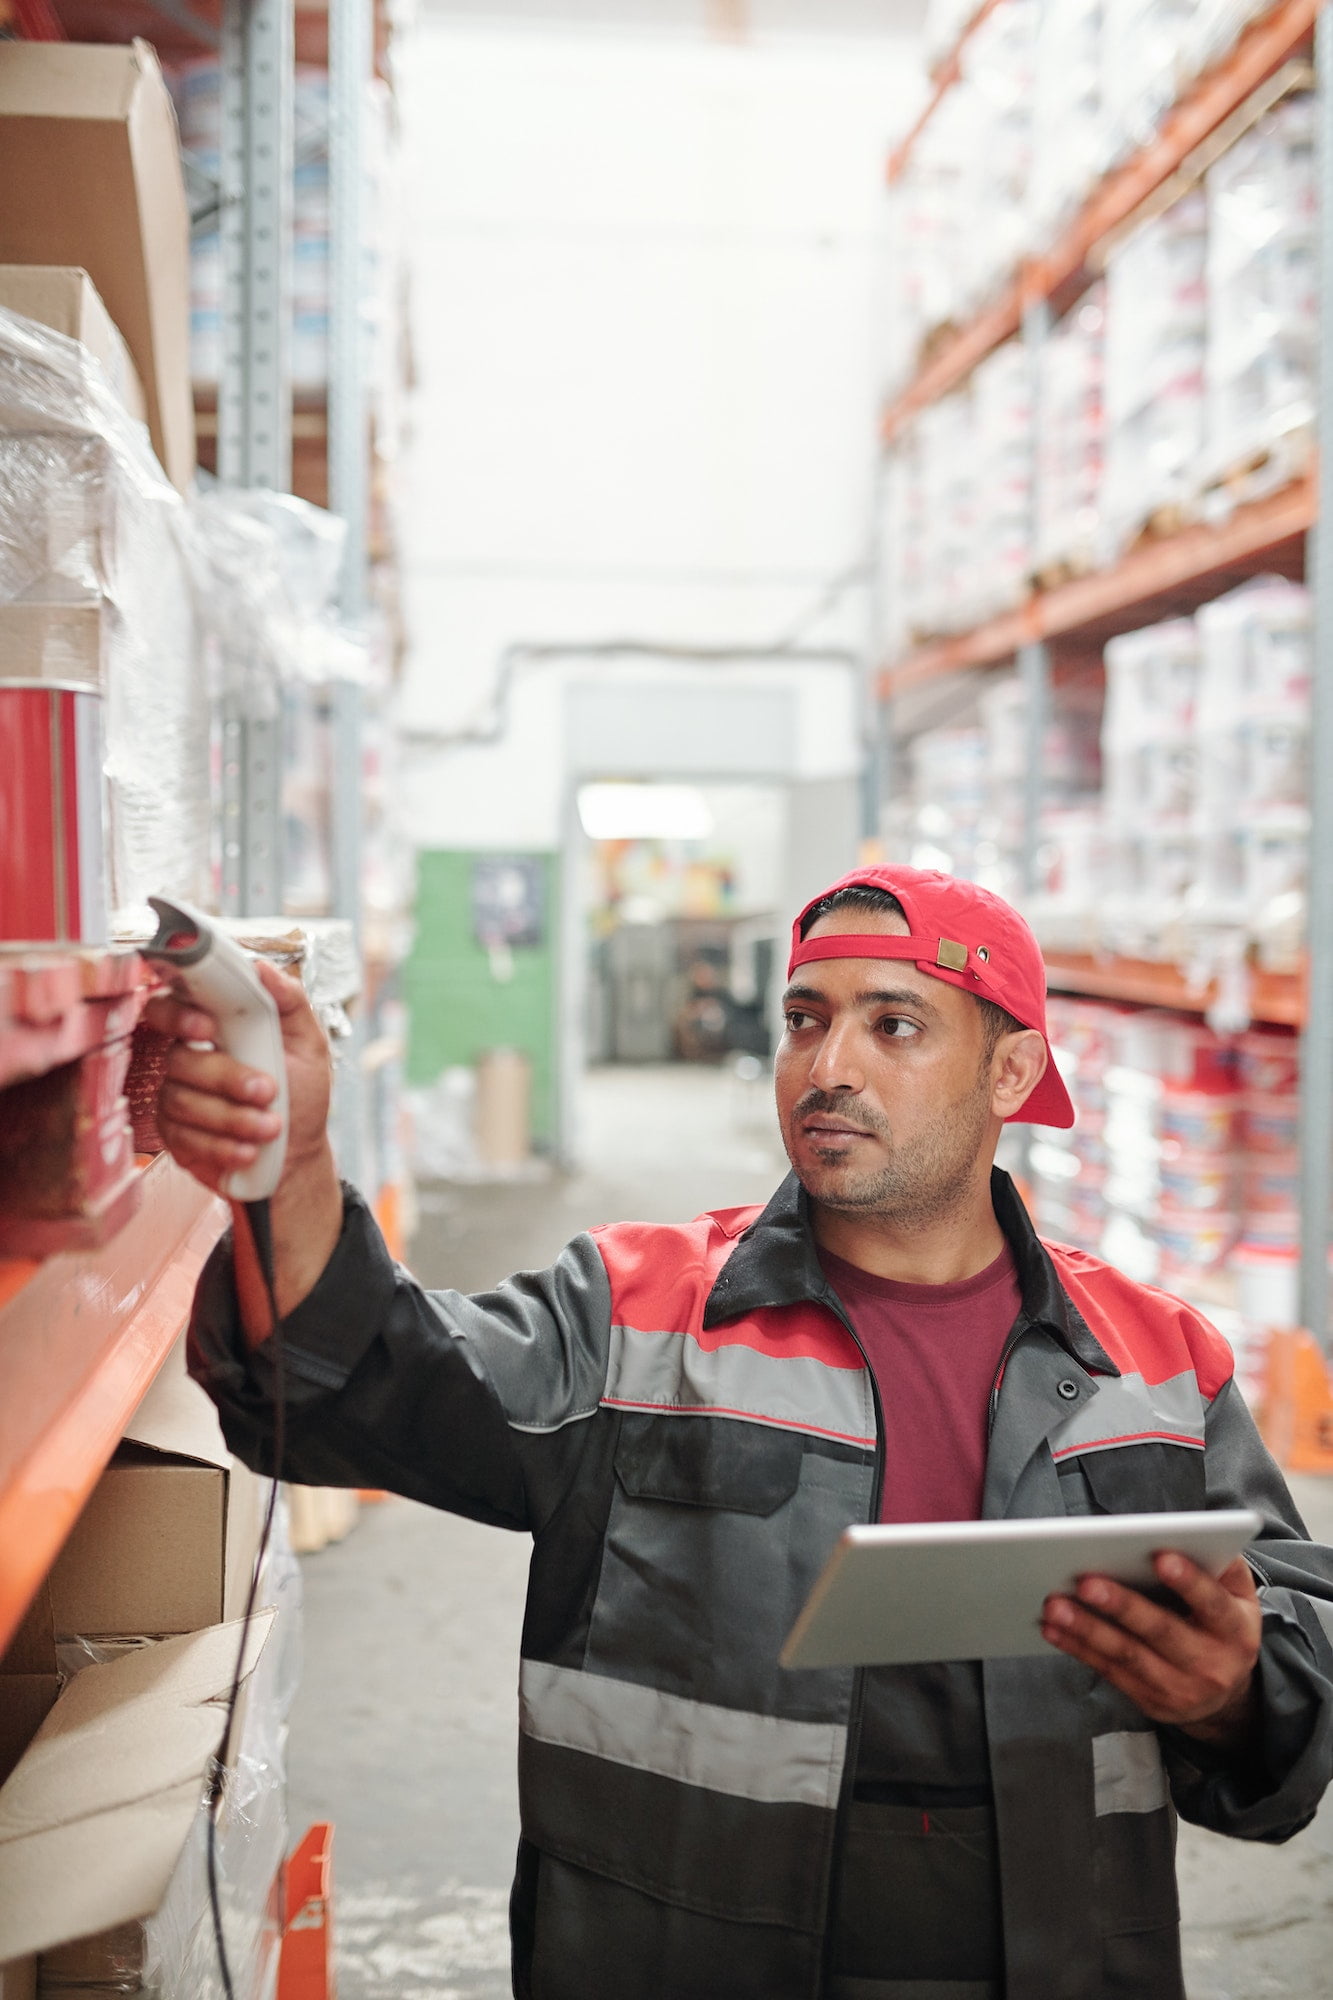 Mixed-race male worker of warehouse in uniform scanning qr codes on boxes